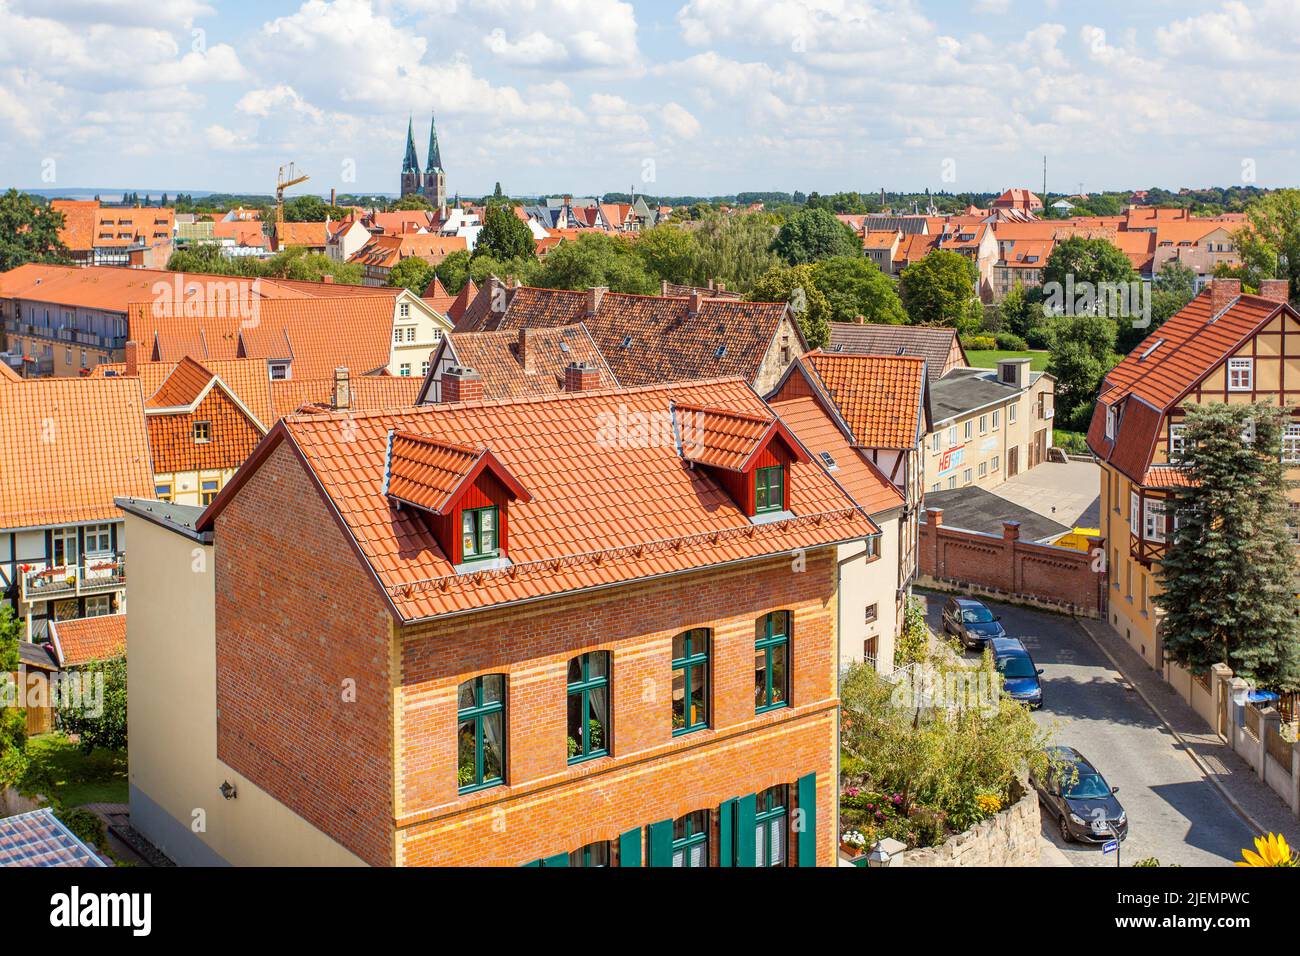 Quedlinburg, Germany - August 12, 2012: View of Quedlinburg town from above Stock Photo